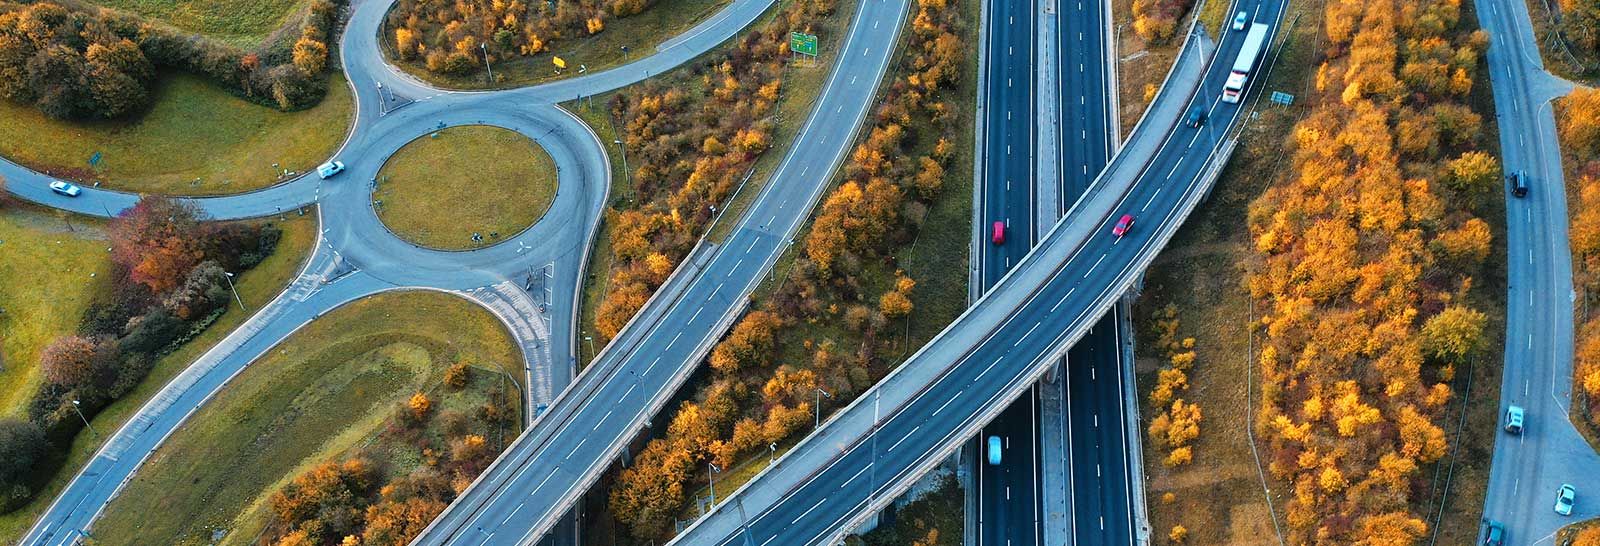 Aerial photo of motorways above a roundabout banner image